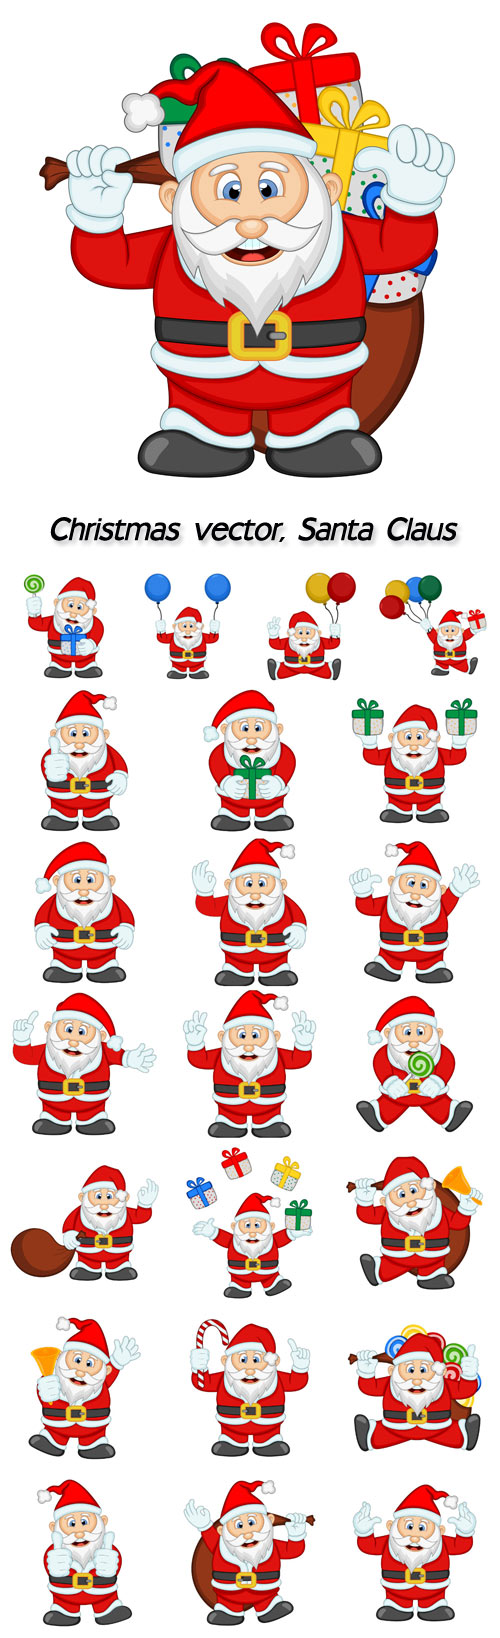 Santa Claus with gifts, vector Christmas